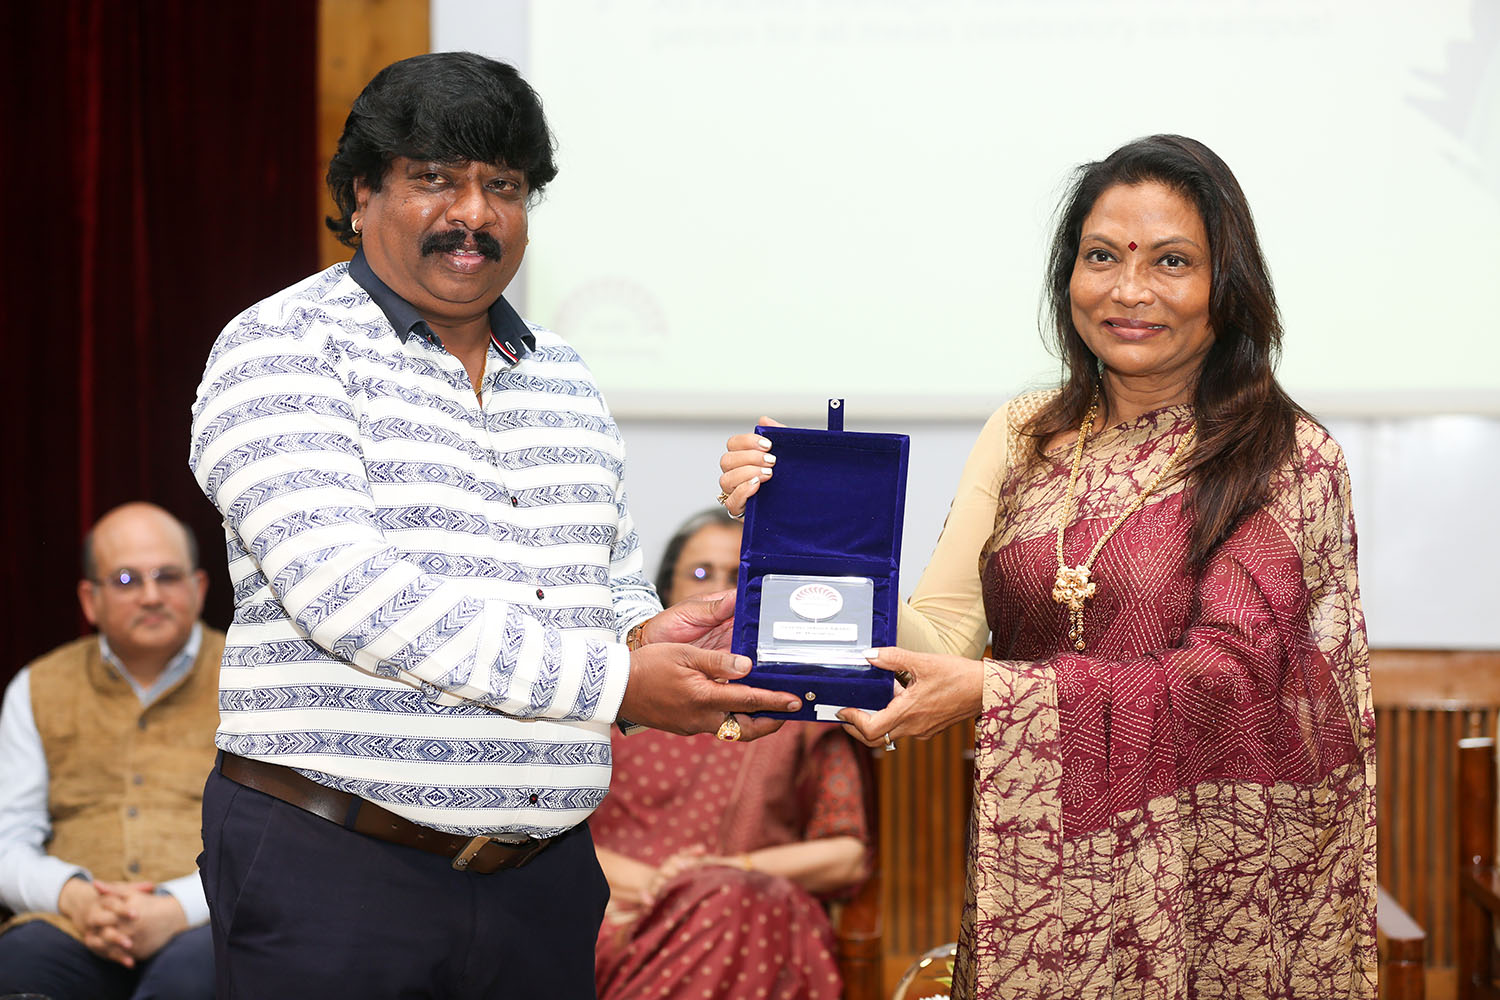 Mr M Janakiram, Facility Manager, receives the award for 10 years of service from Ms. Kalpana Saroj, Member of the Board of Governors, IIMB, during the institute’s 49th Foundation Day celebrations.